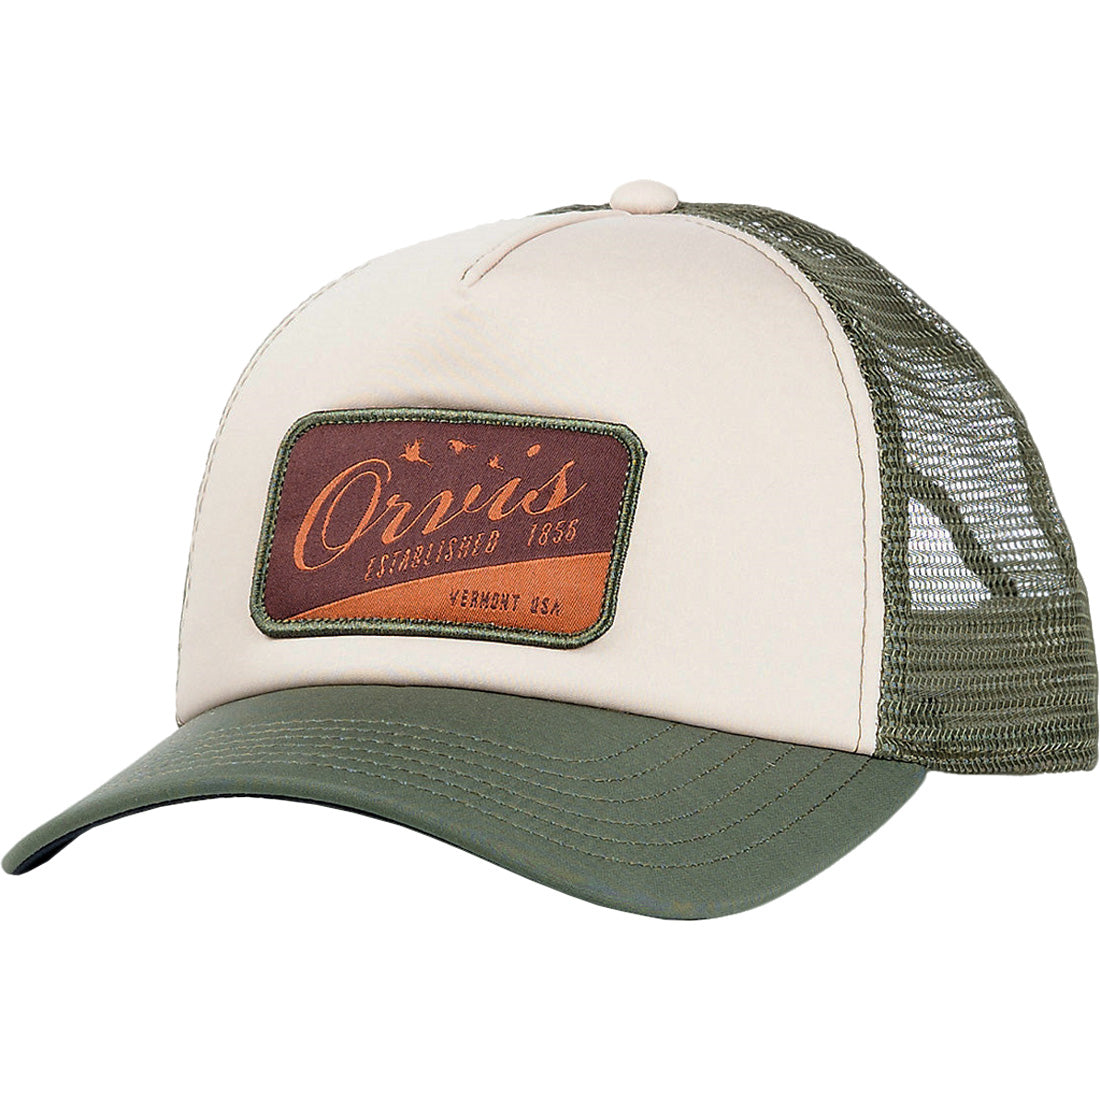 Preserve Orvis The Perfect Flannel Shirt, Regular - 1971 Camo or